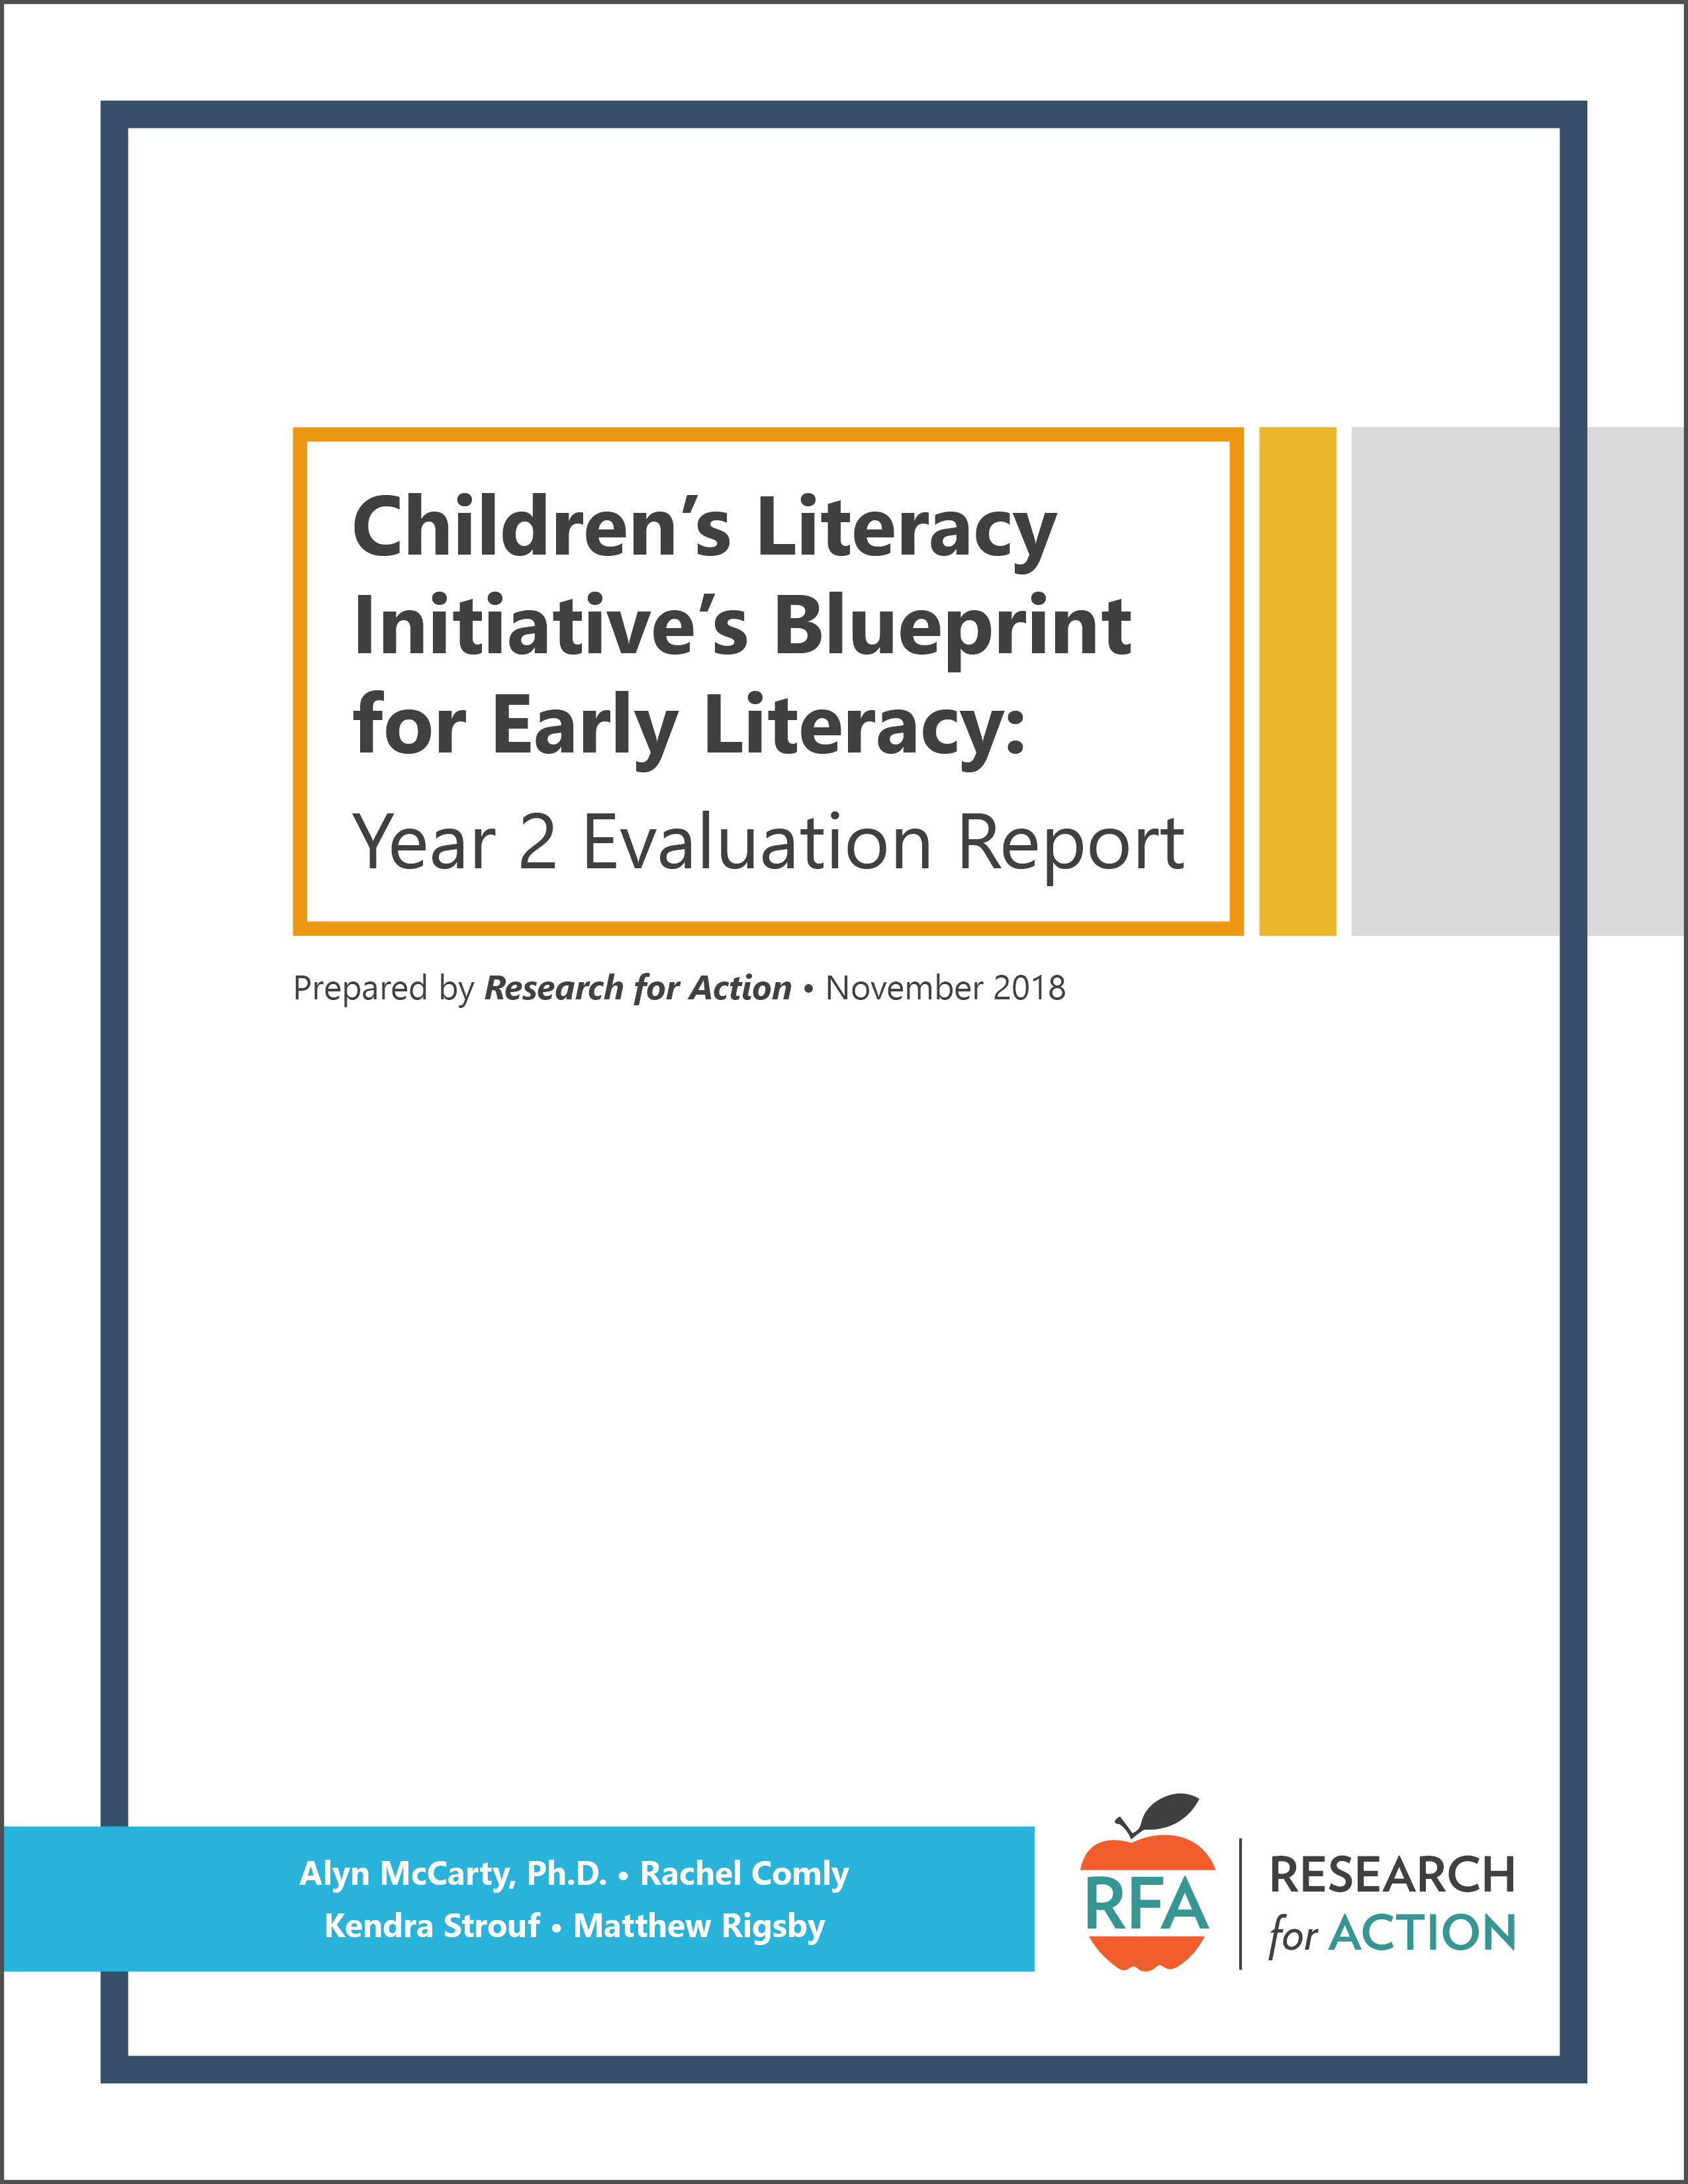 https://cliblueprint.org/wp-content/uploads/2019/03/Childrens-Literacy-Initiative_Blueprint_Year-2-Evaluation-Report.pdf